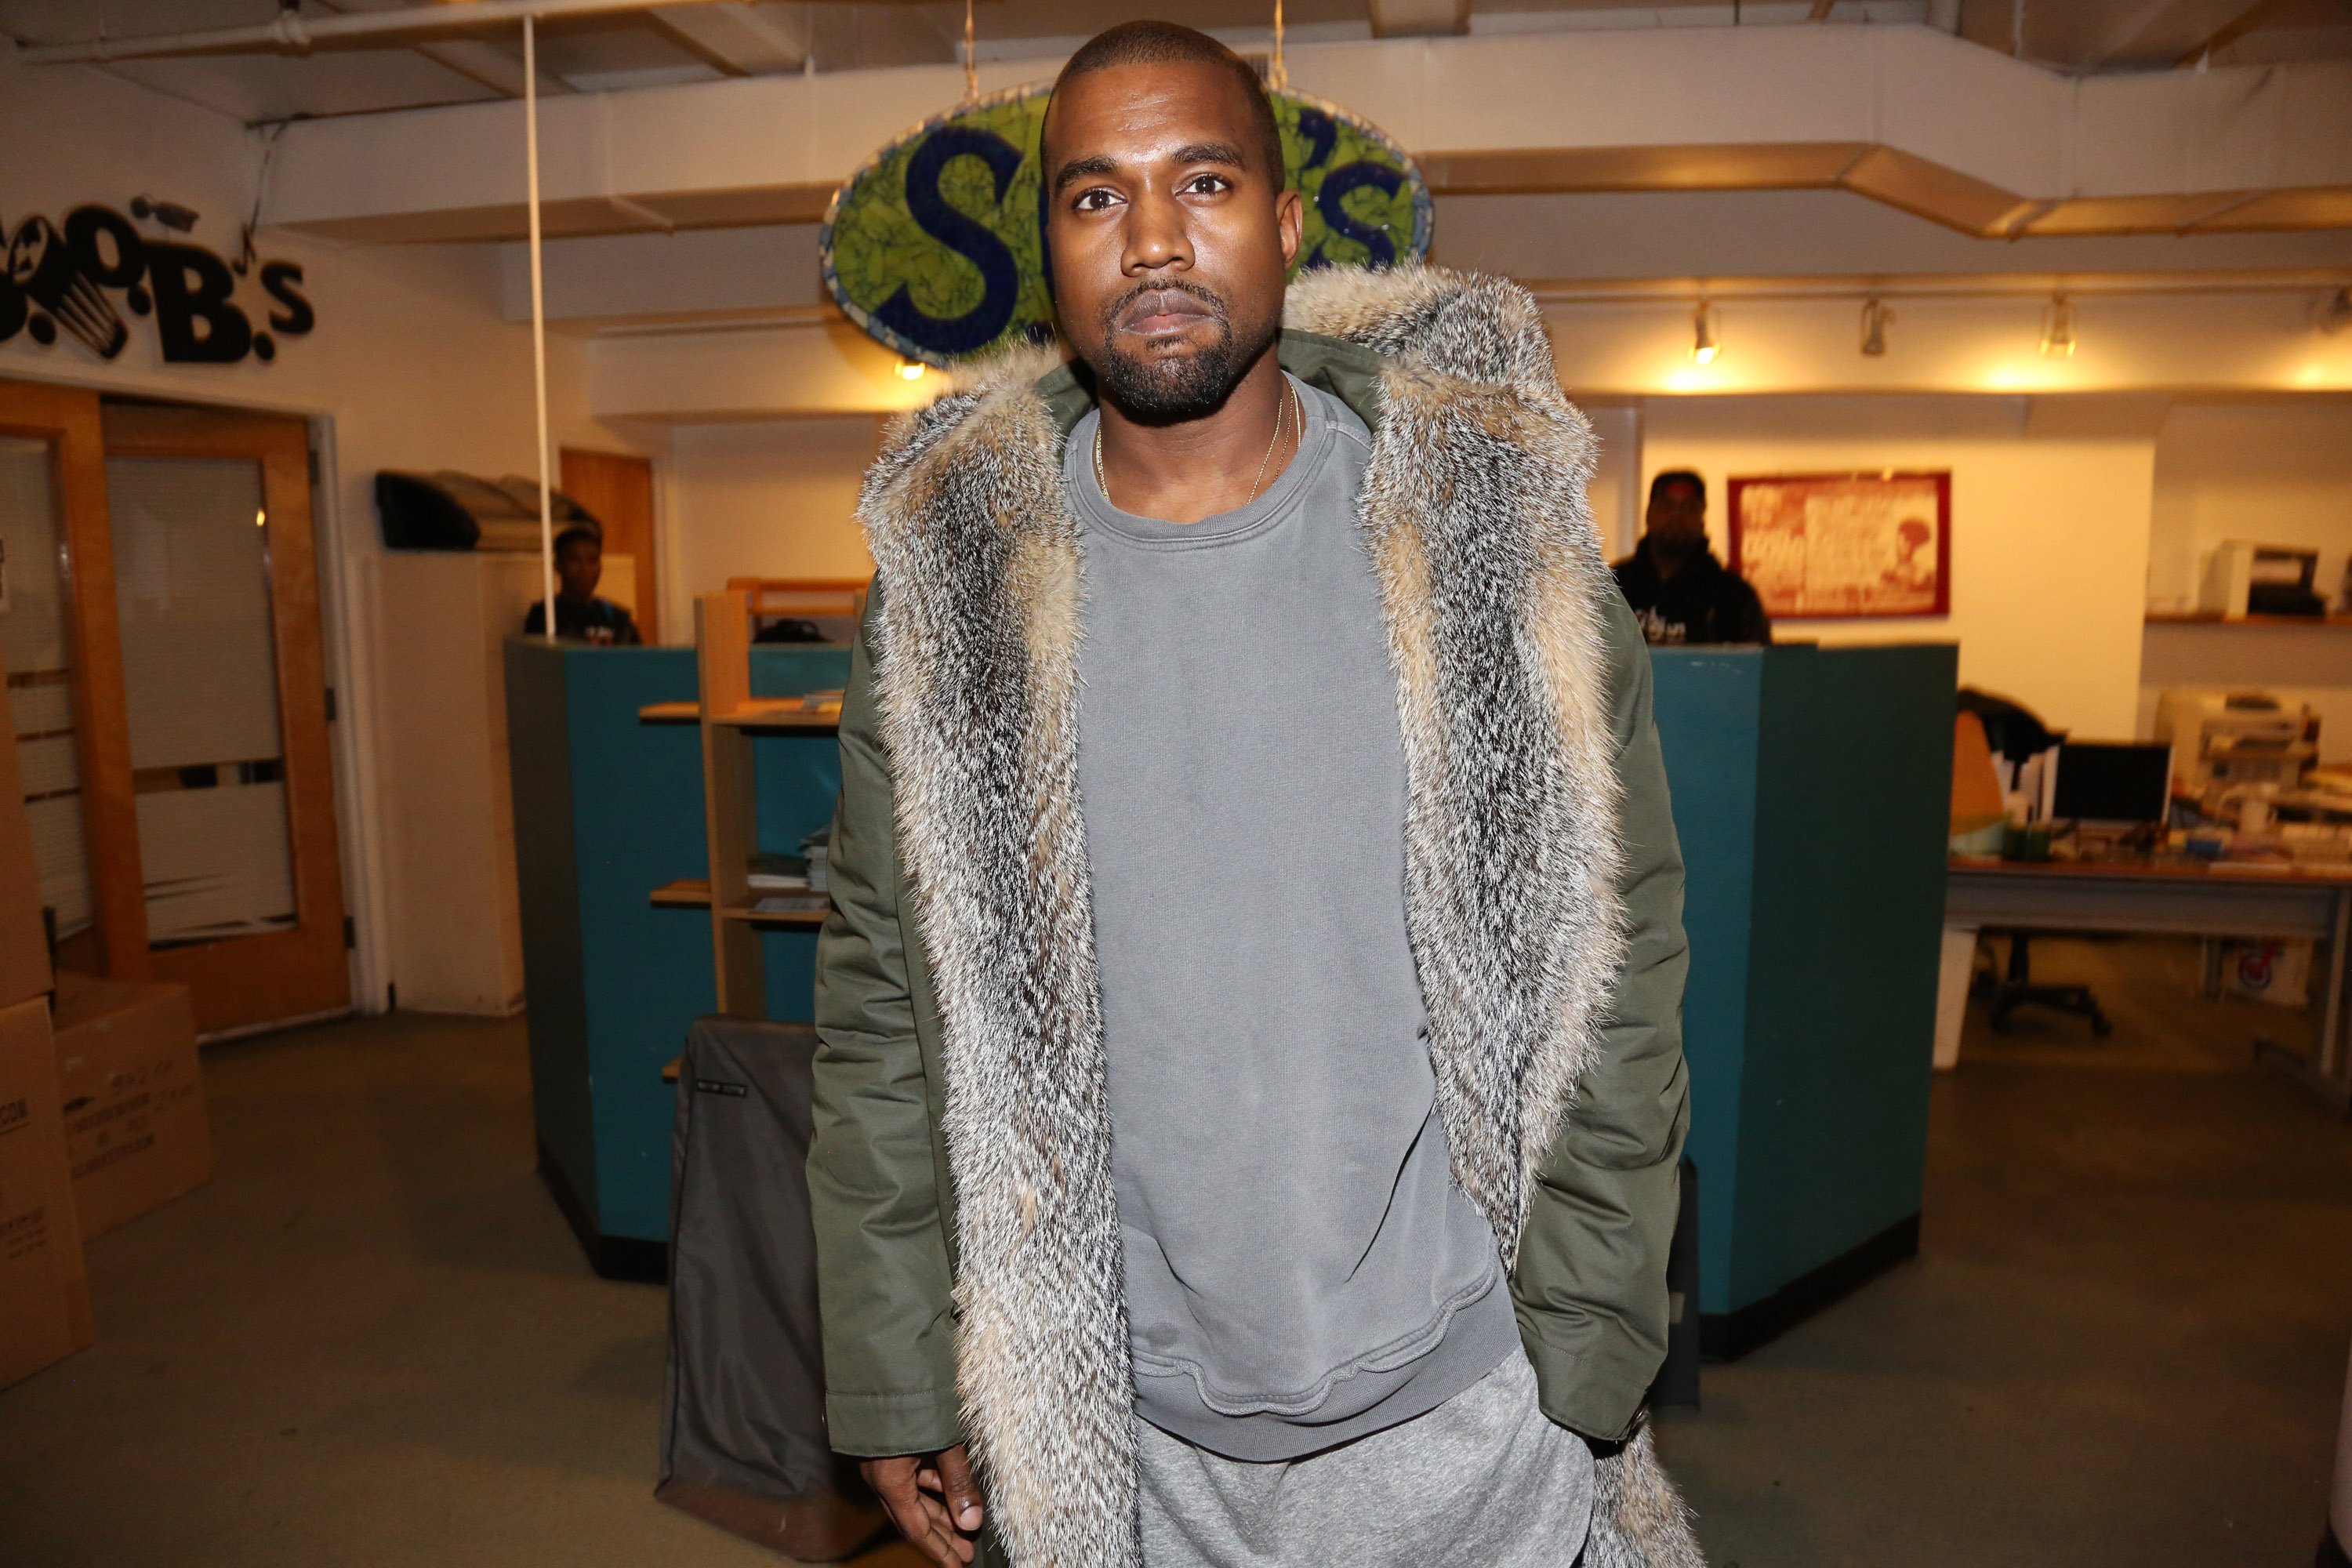 Kanye West attends SOB's on December 4, 2014, in New York City | Photo: GettyImages